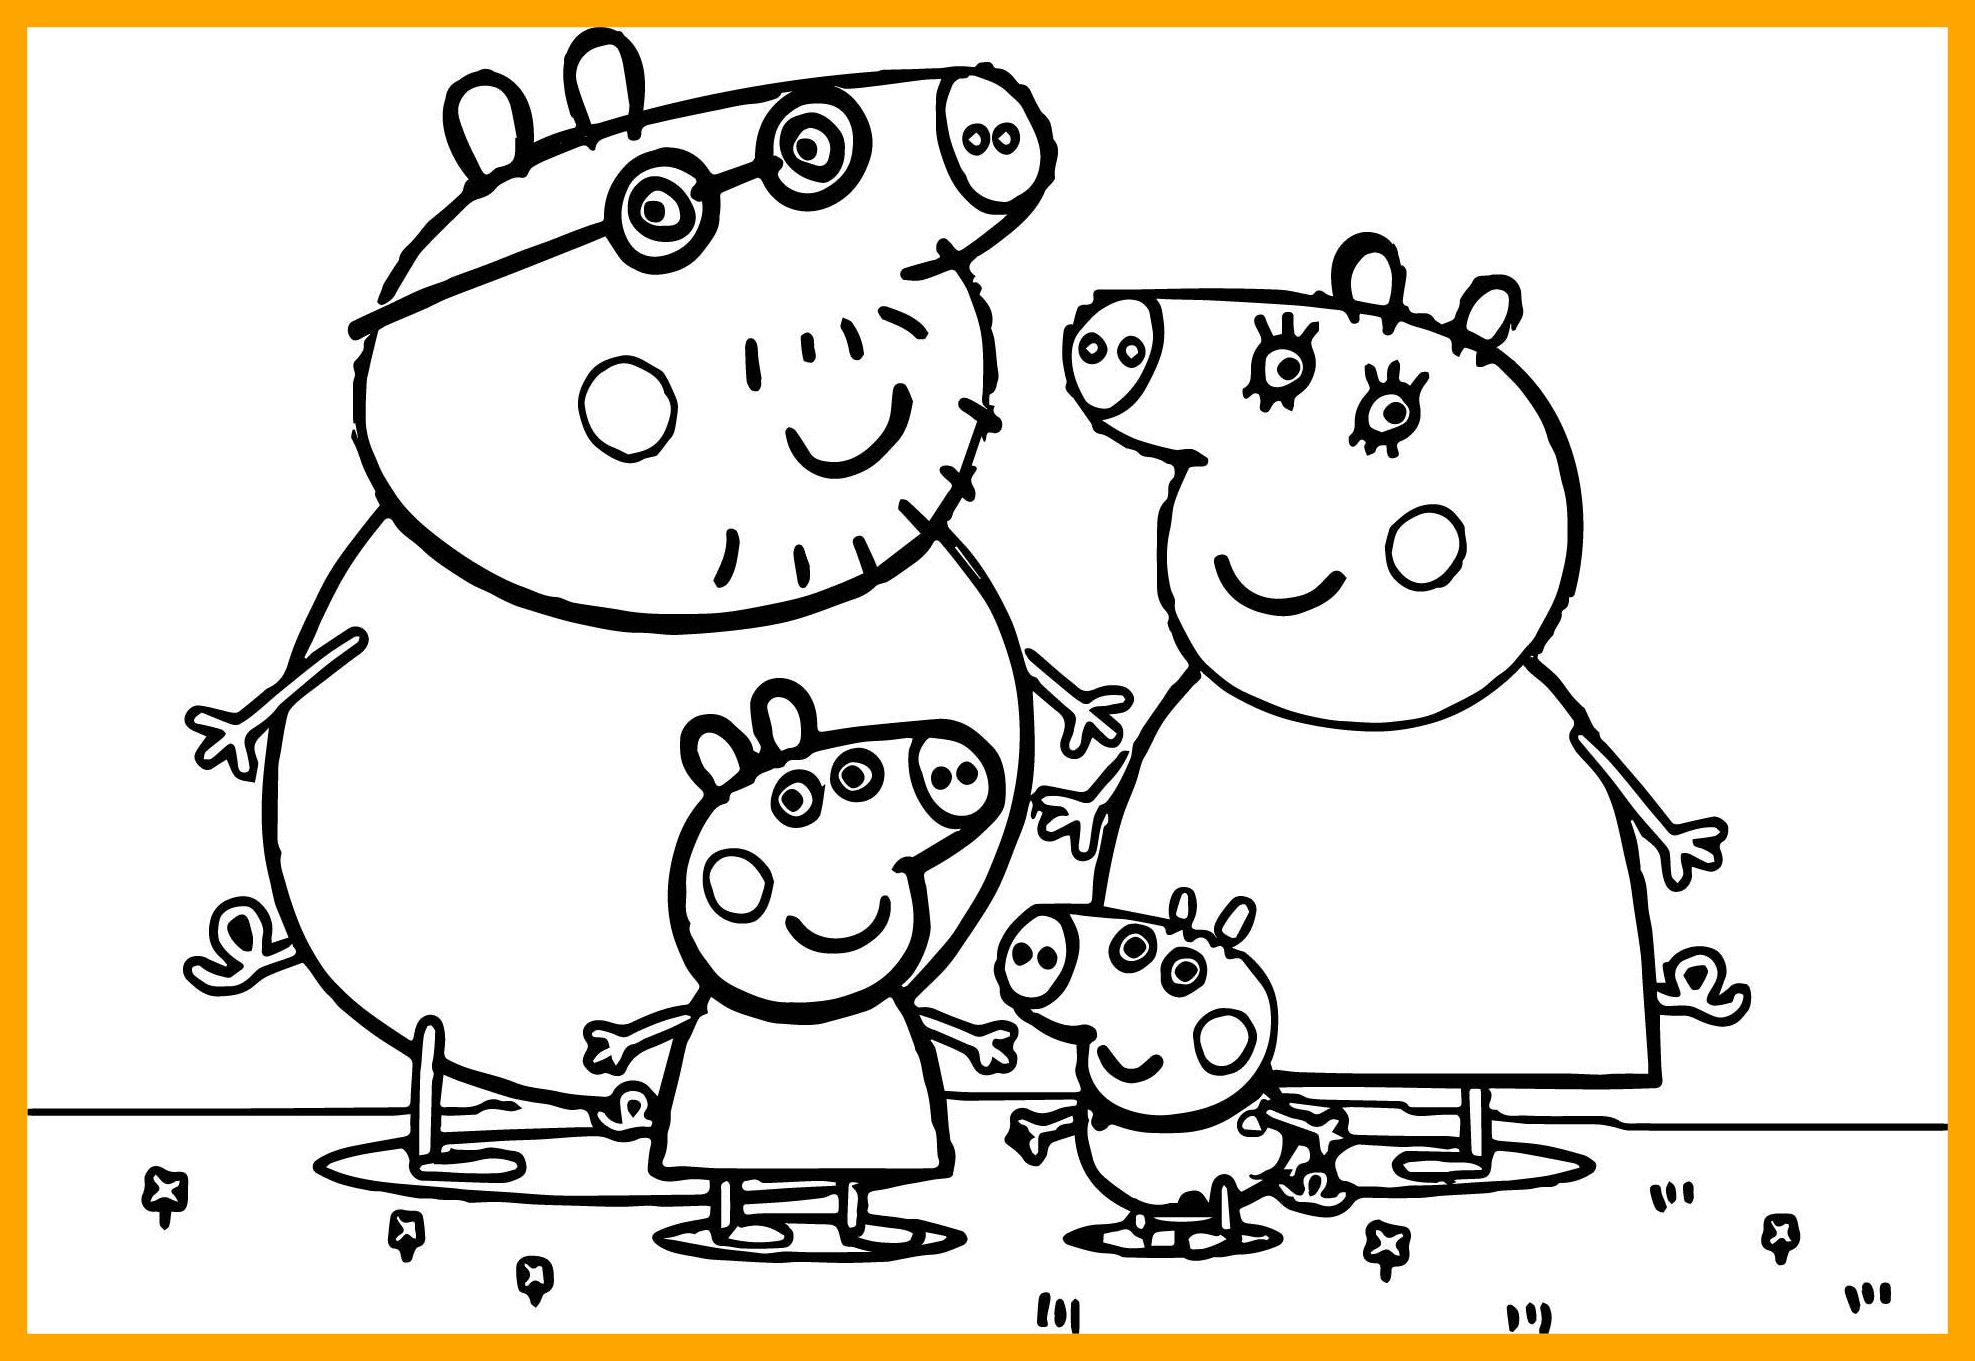 Peppa Pig Coloring Pages Online at GetColorings.com | Free printable colorings pages to print ...